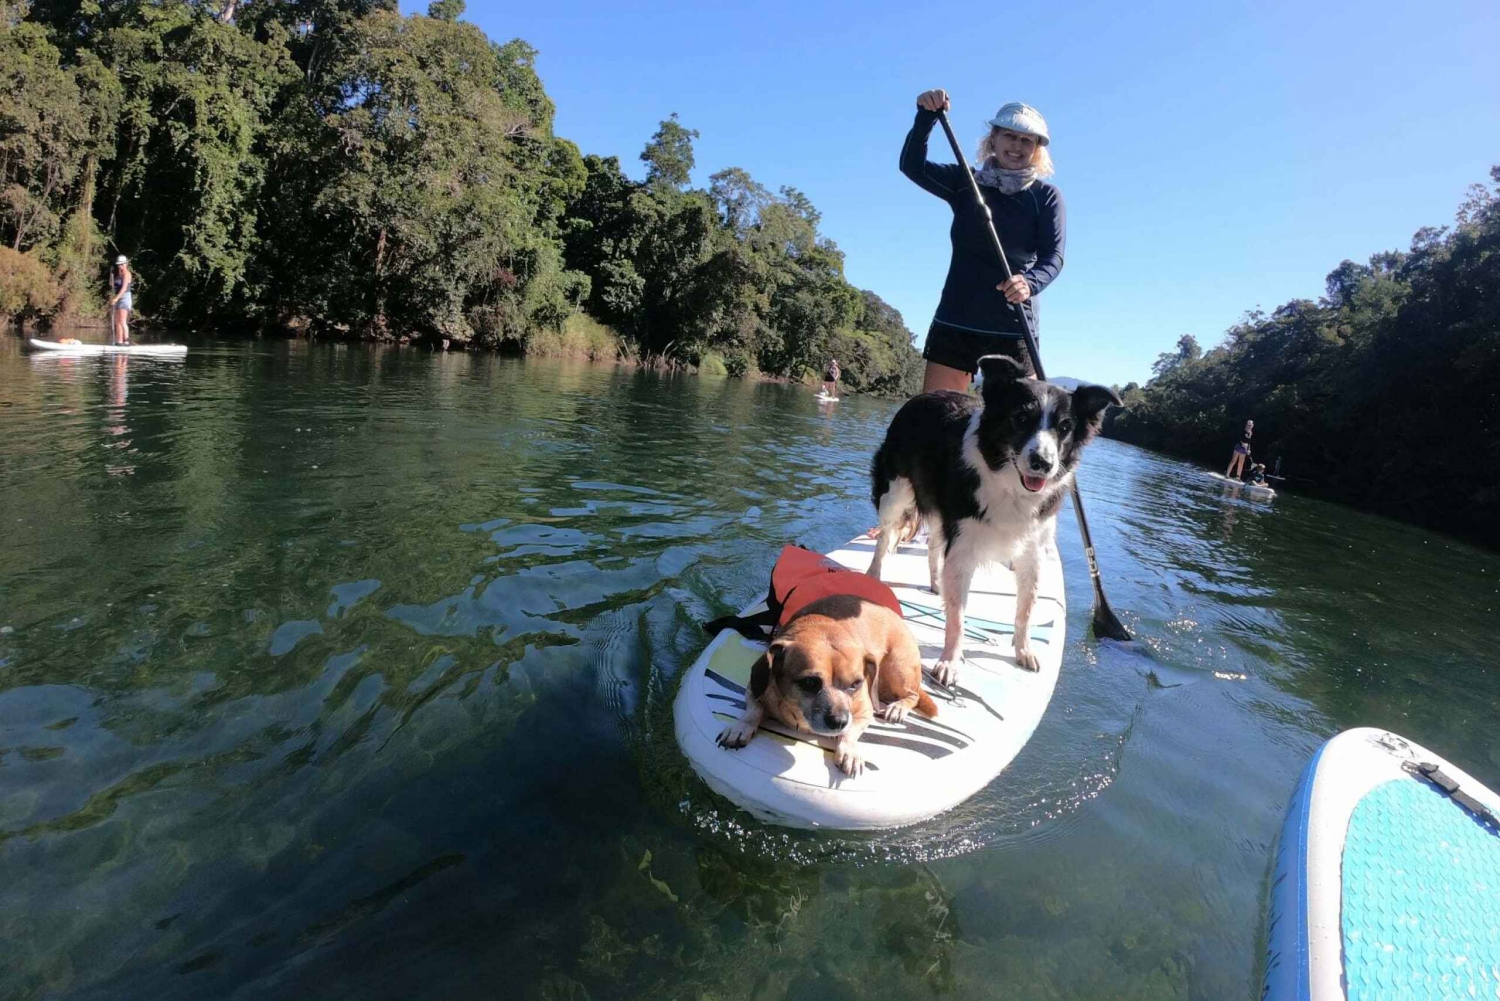 Cairns: Standup Paddleboard Tour in Goldsborough Valley